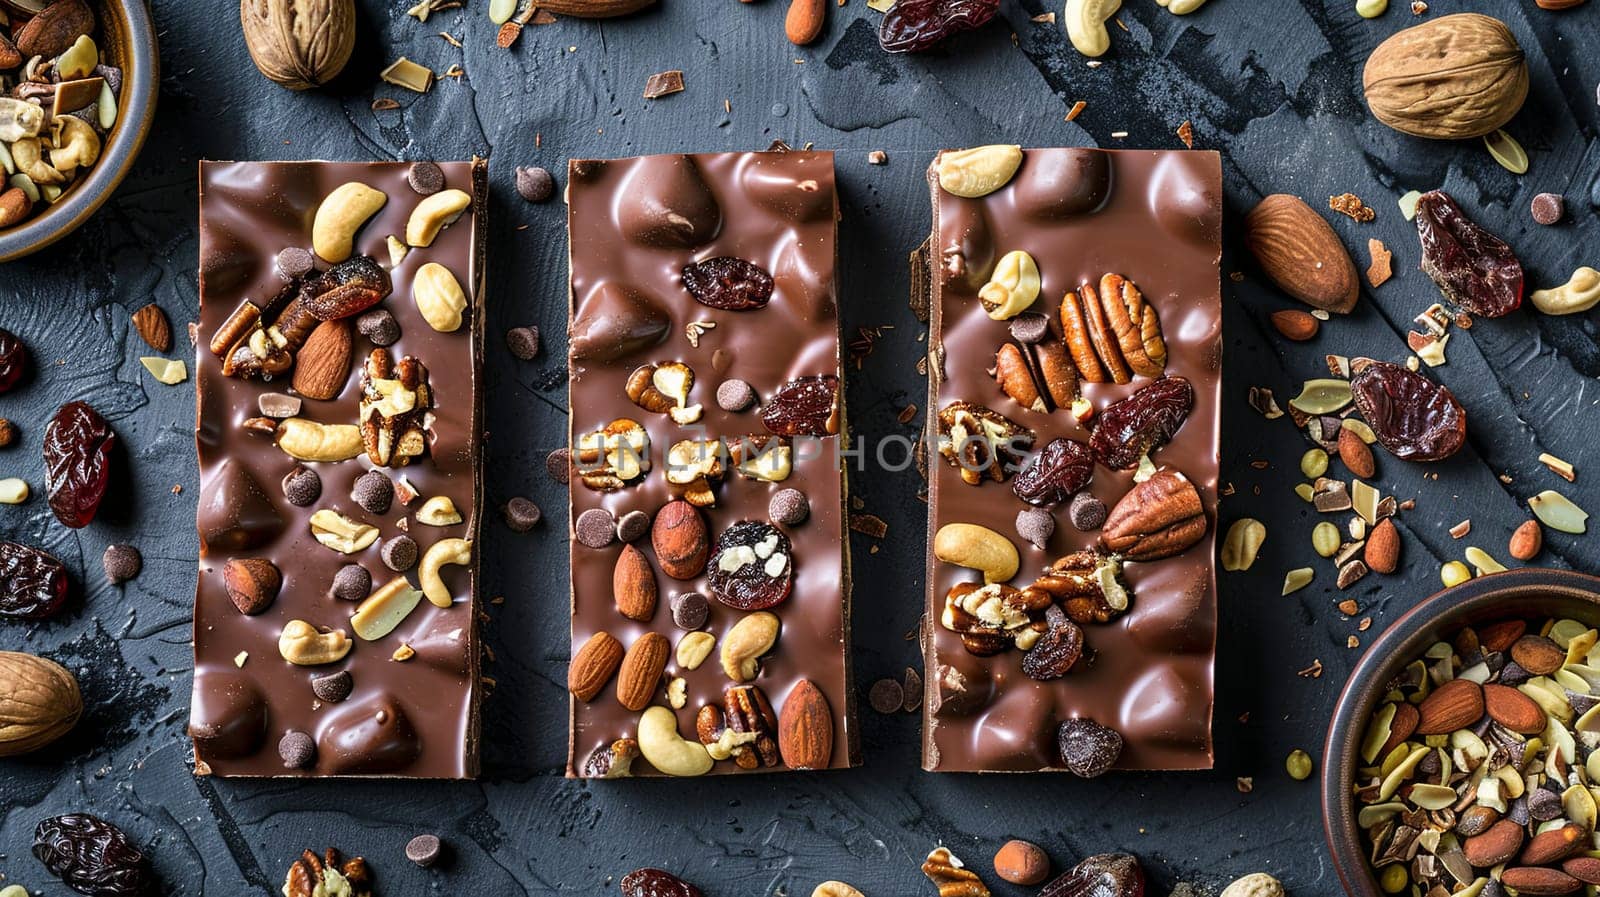 Three chocolate bars containing nuts, almonds, and cranberries, showcasing rich textures and natural ingredients.